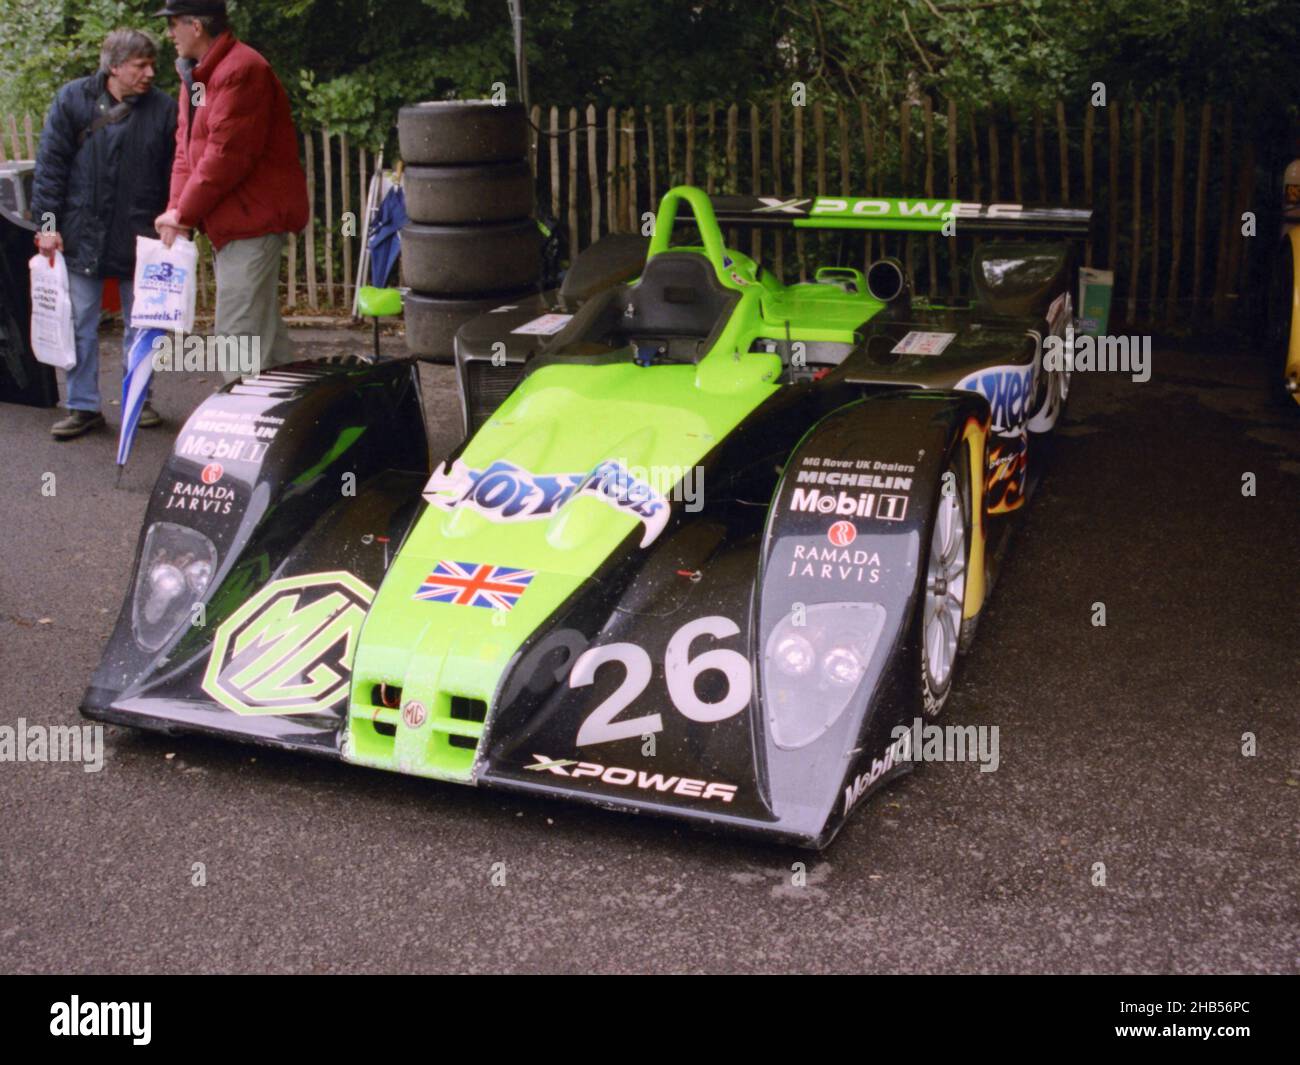 The 2002 MG-Lola EX257 which ran well (in the top 10) at the Le Mans 24 hour race 2002, until gremlins struck early Sunday morning. Pictured here at the 2002 Goodwood Festival of Speed.  The car was entered by the MG Rover Group (UK) to be driven by Julian Bailey and Rob Oldaker. Stock Photo